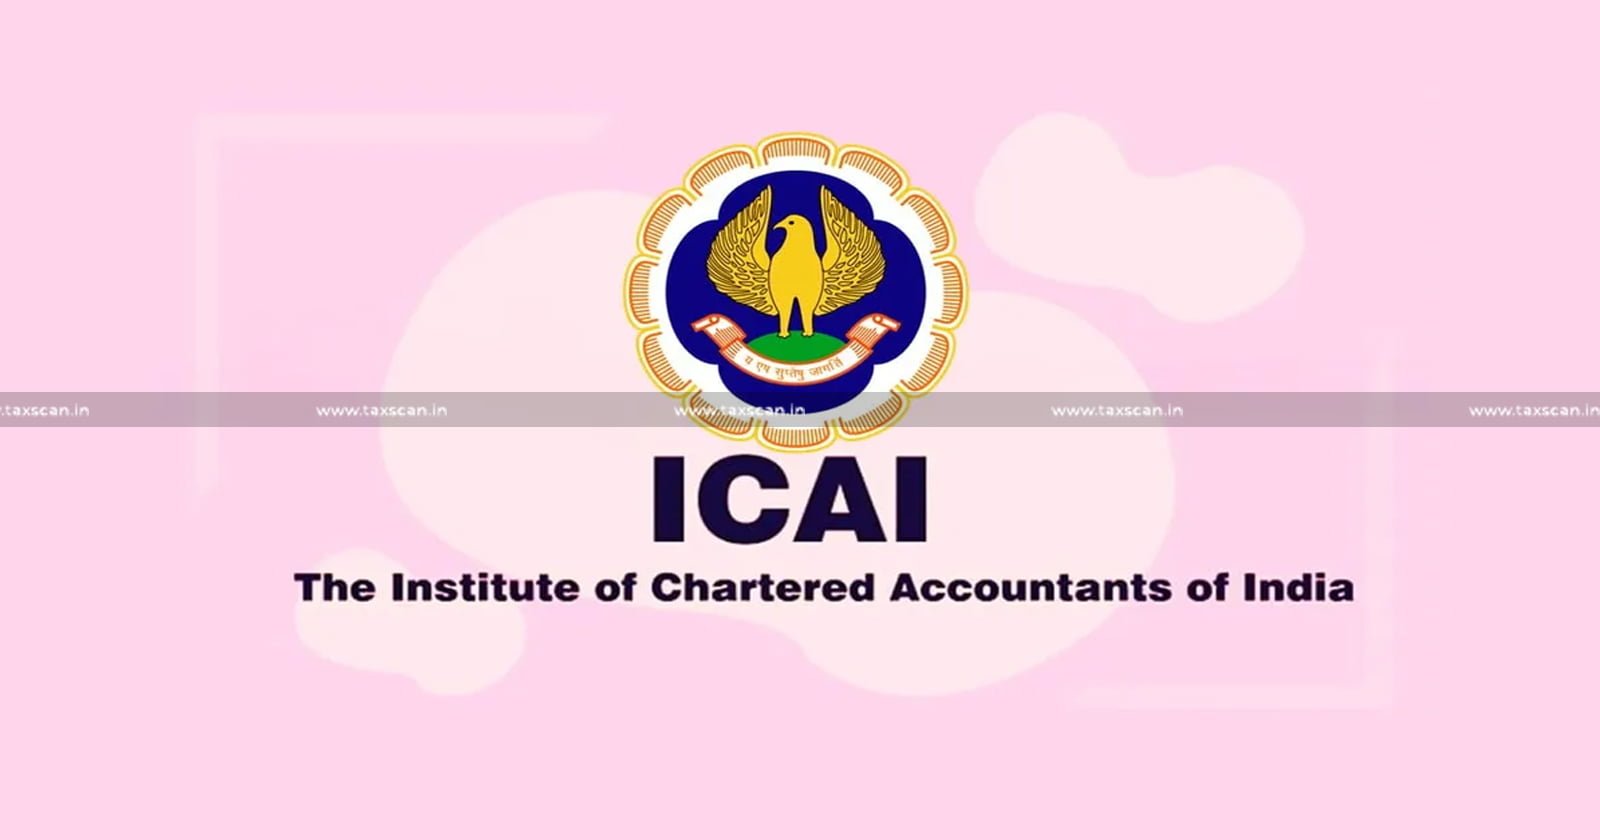 Institute of Chartered Accountants of India - Wikipedia